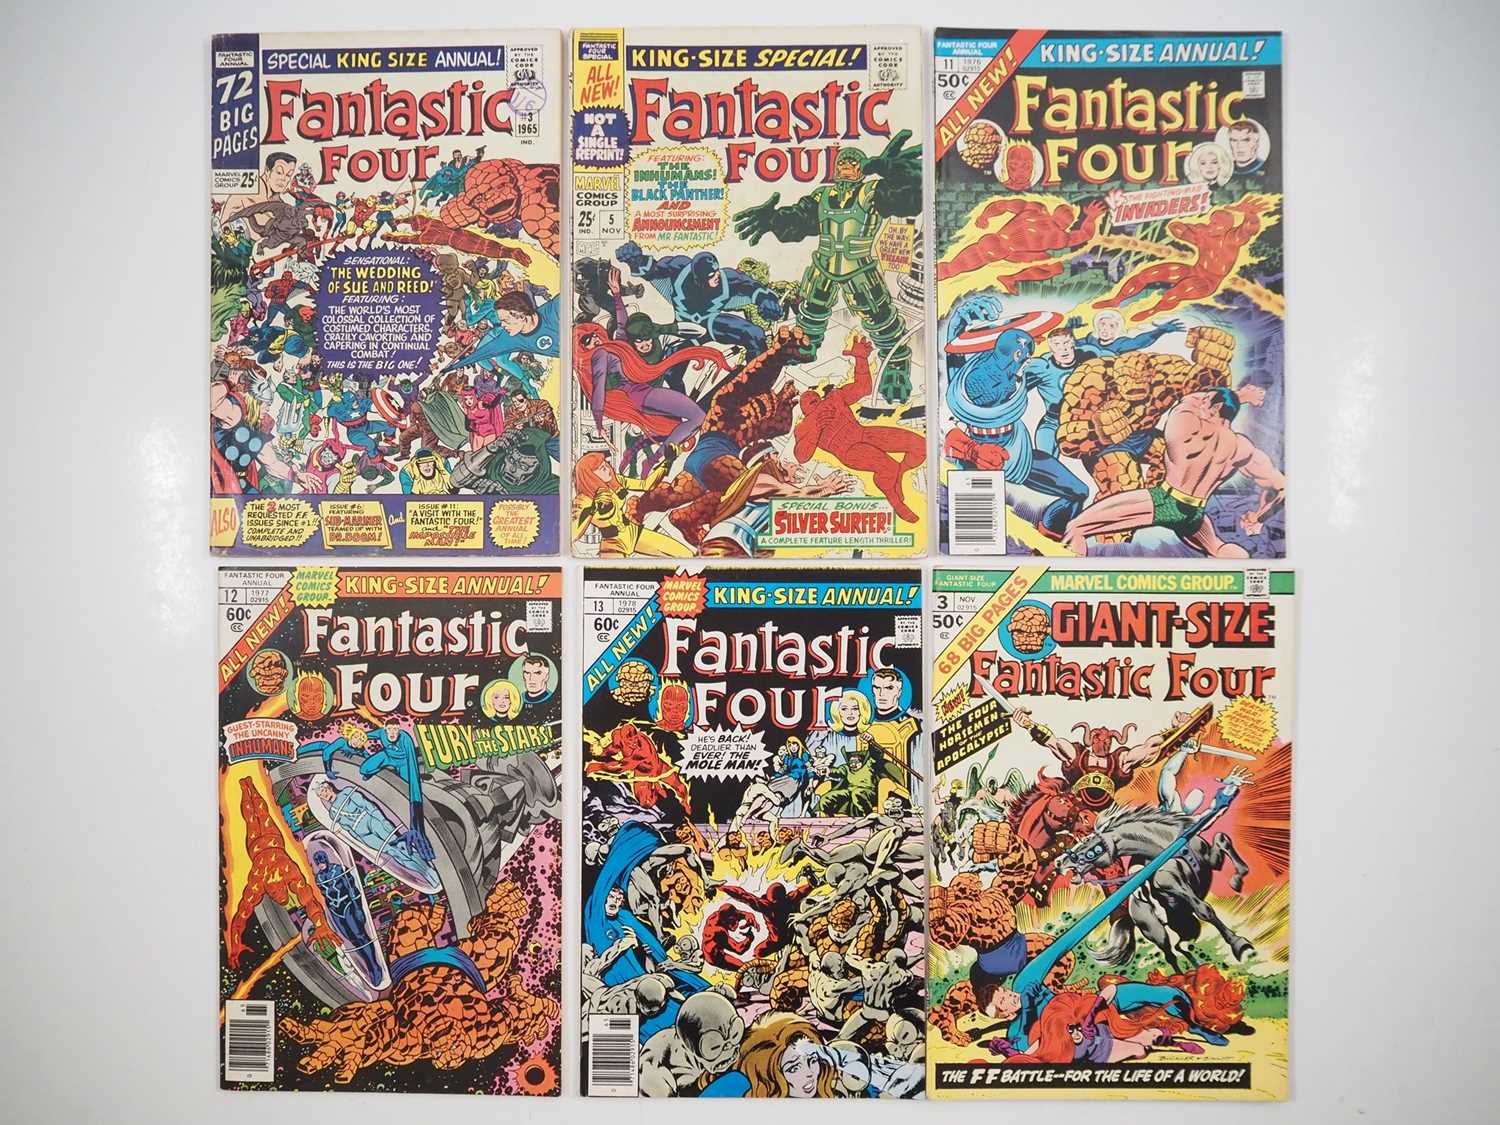 FANTASTIC FOUR ANNUALS #3, 5, 11, 12, 13 + GIANT-SIZE FANTASTIC FOUR #3 (6 in Lot) - (1965/1978 -